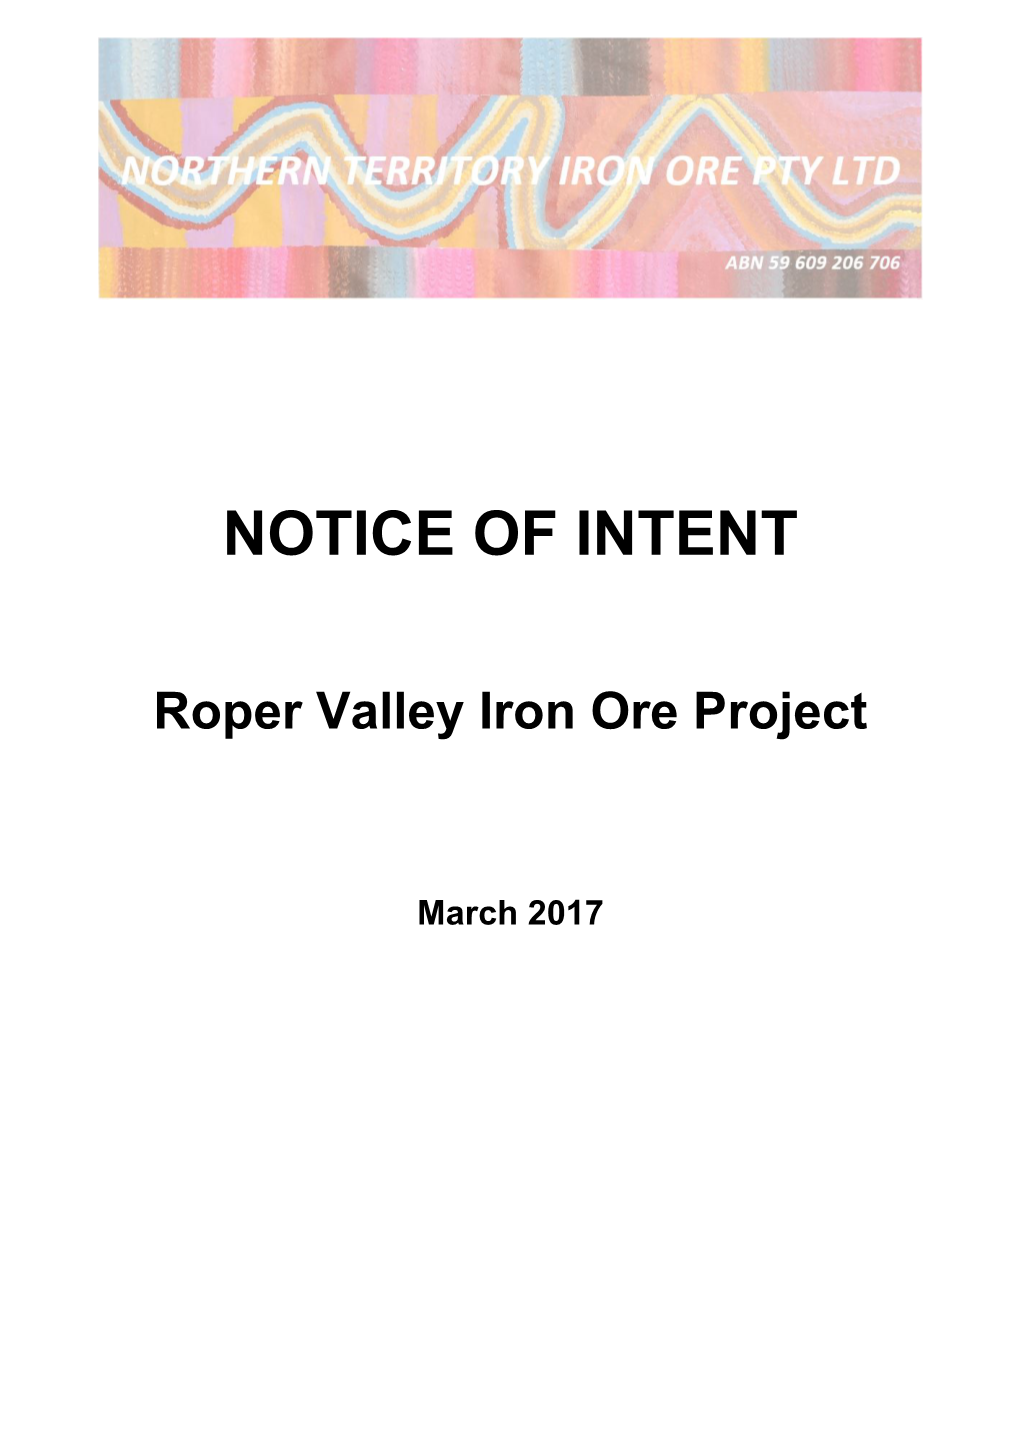 Roper Valley Iron Ore Project